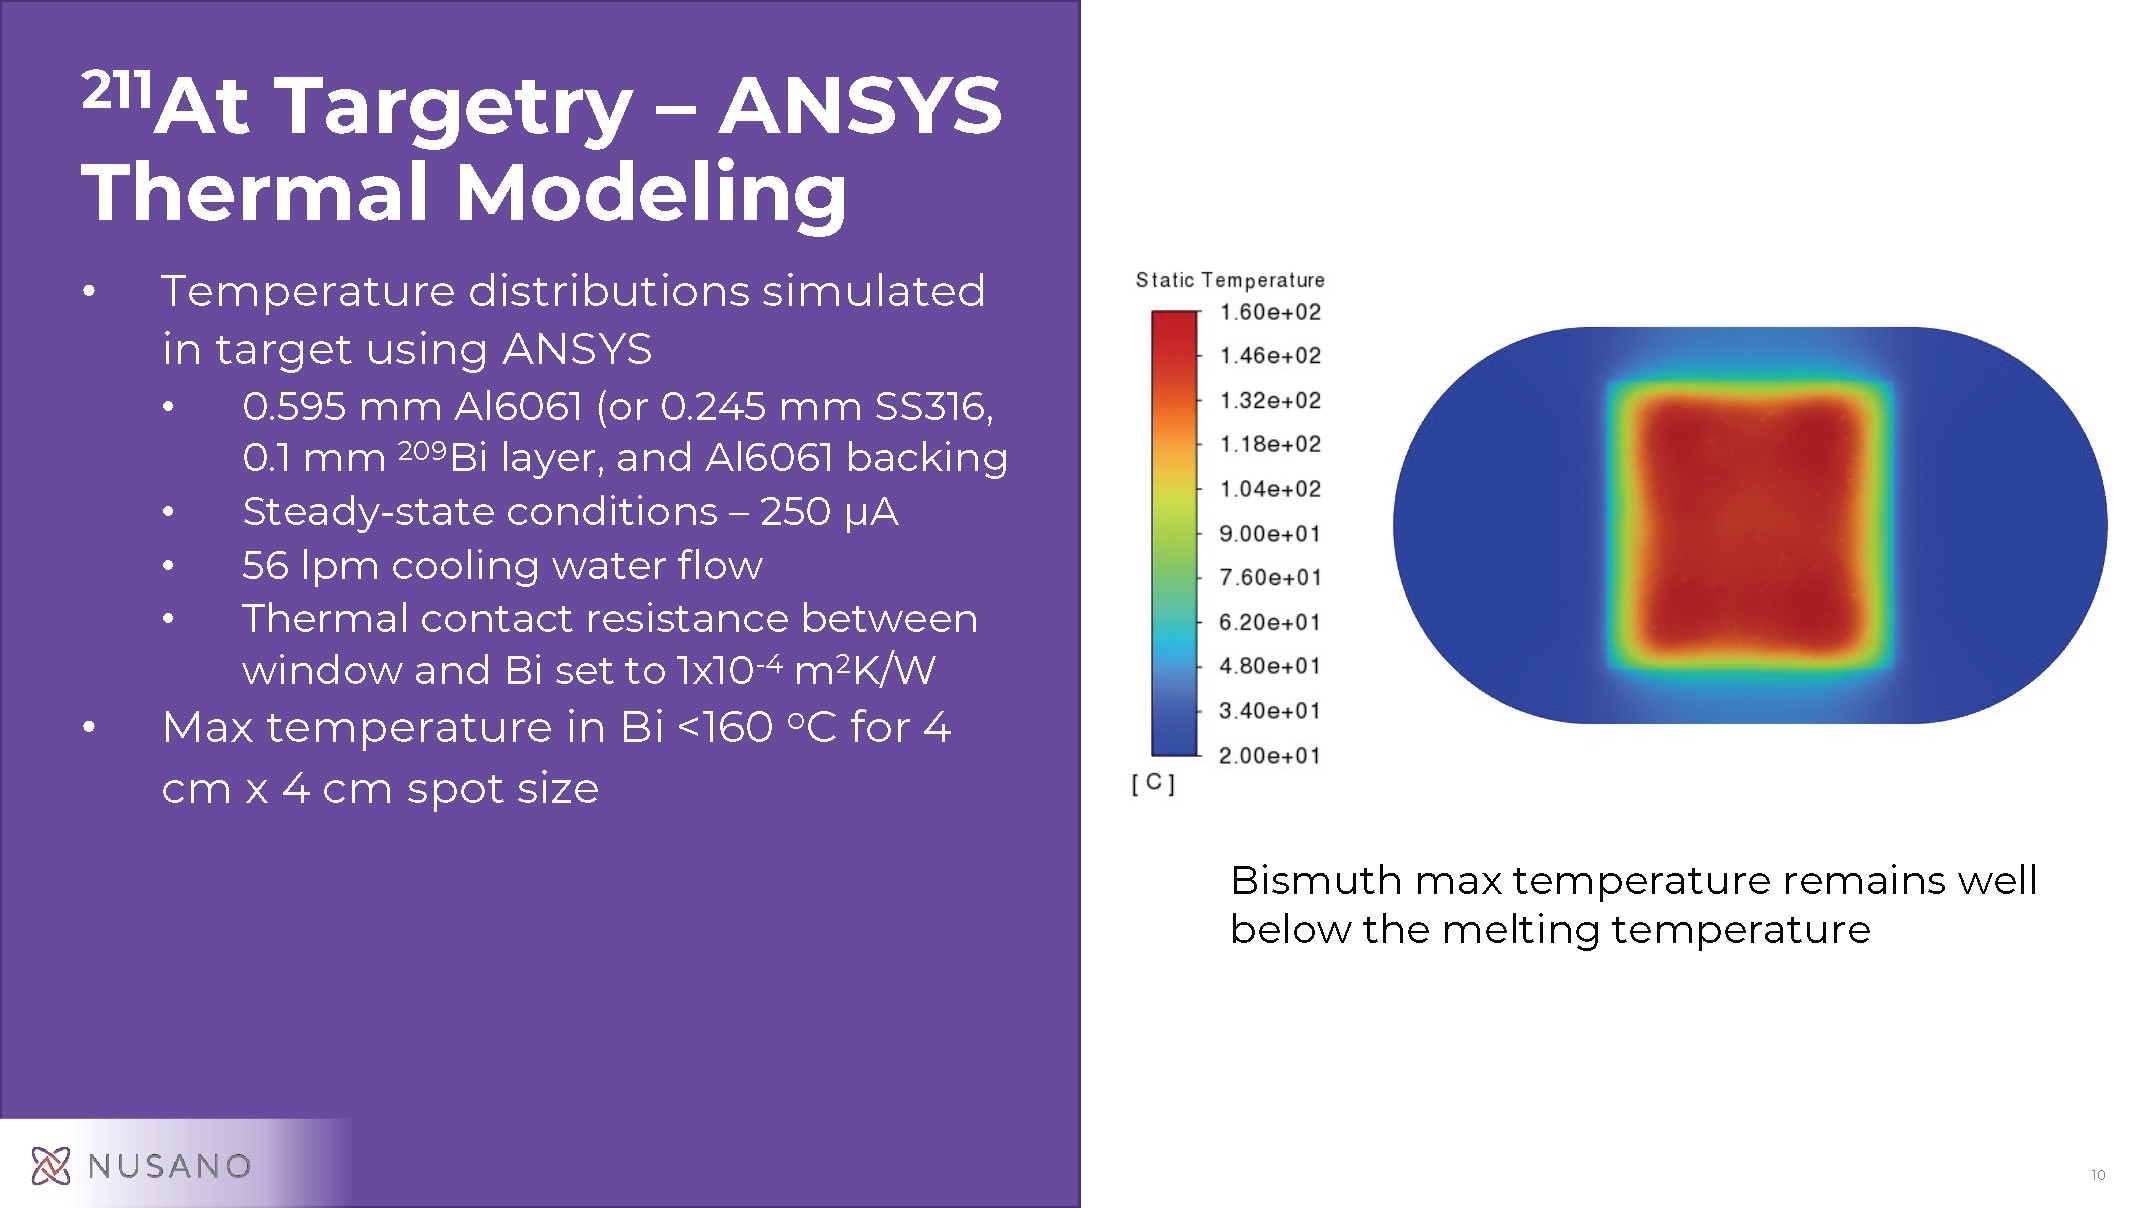 ANSYS thermal modeling